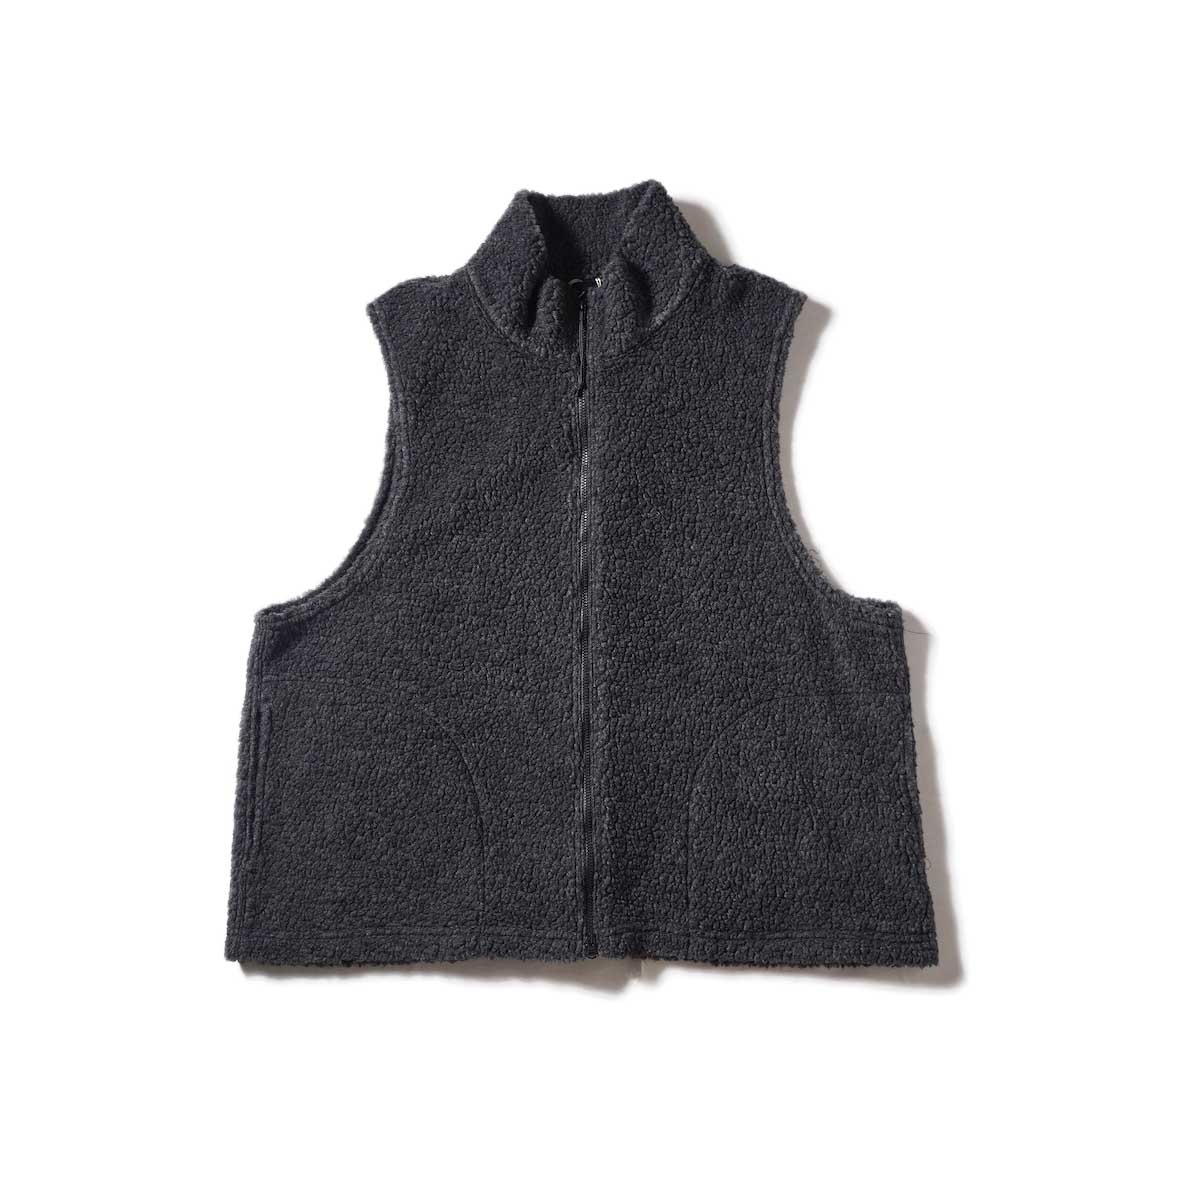 Engineered Garments / High Mock Knit Vest - Wool Poly Shaggy Knit (Charcoal)